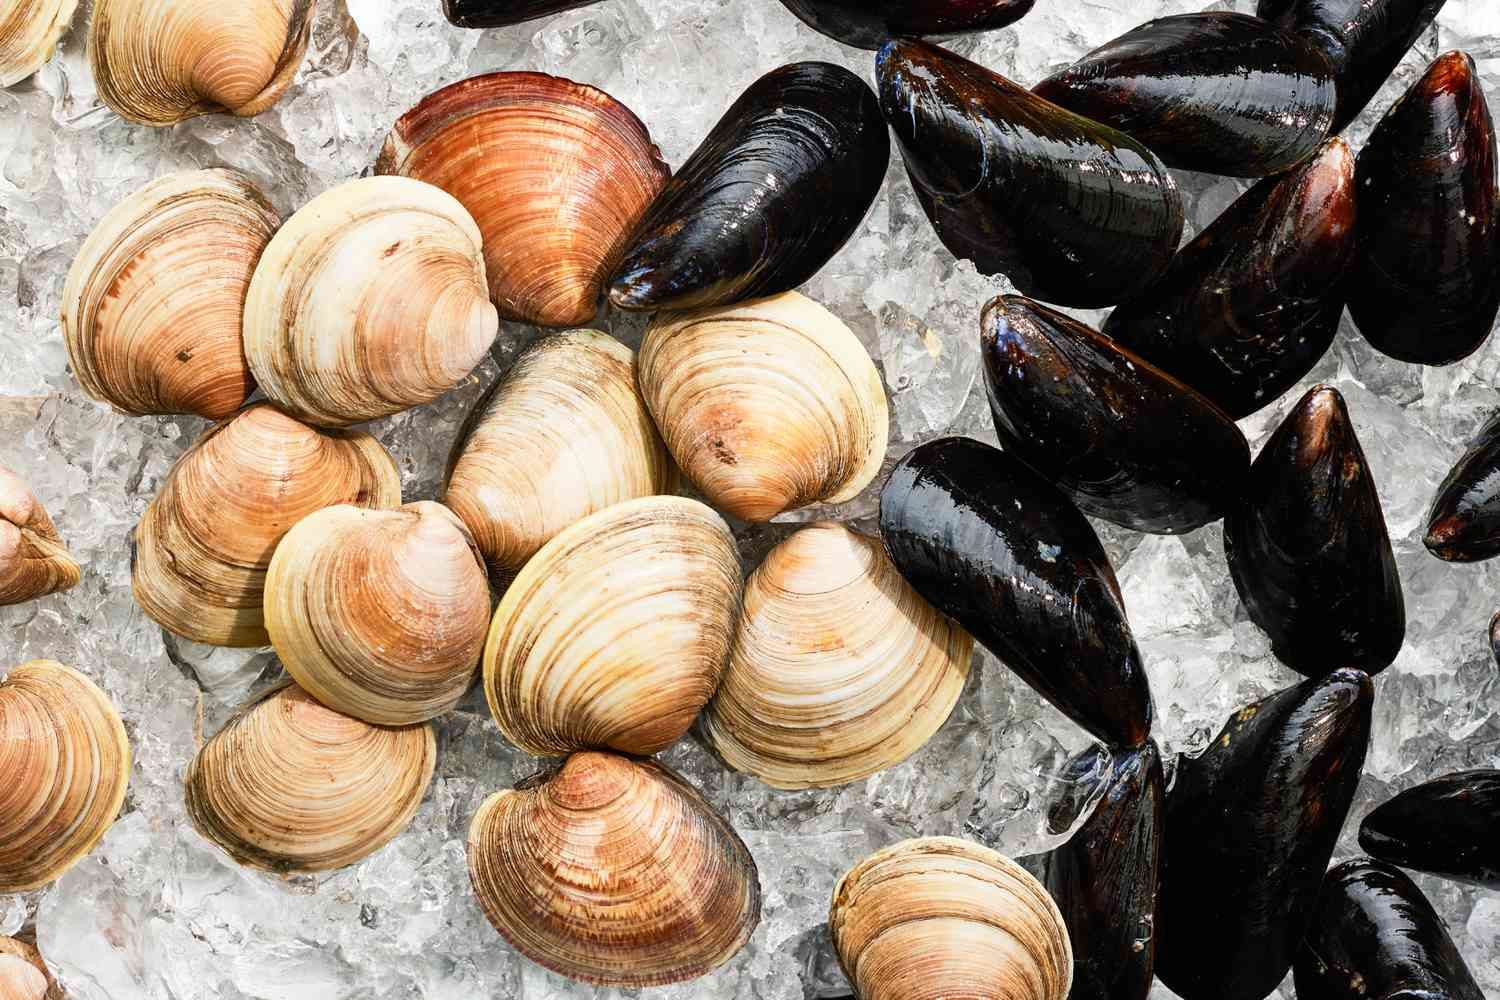 How To Store Mussels And Clams